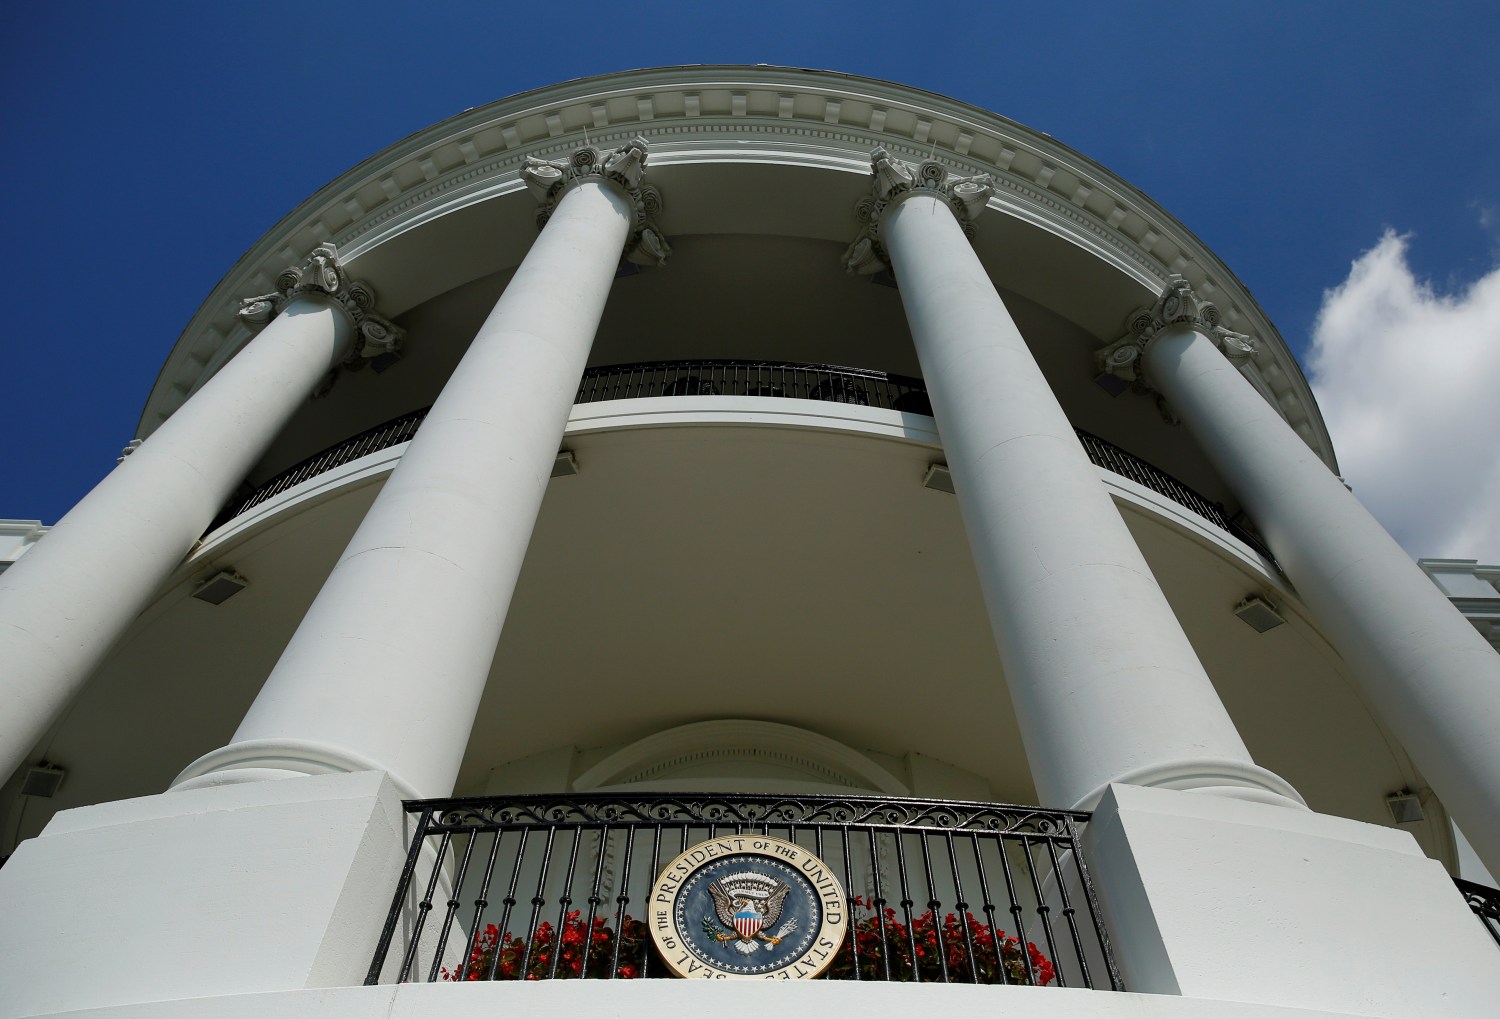 The Truman Balcony and Presidential seal